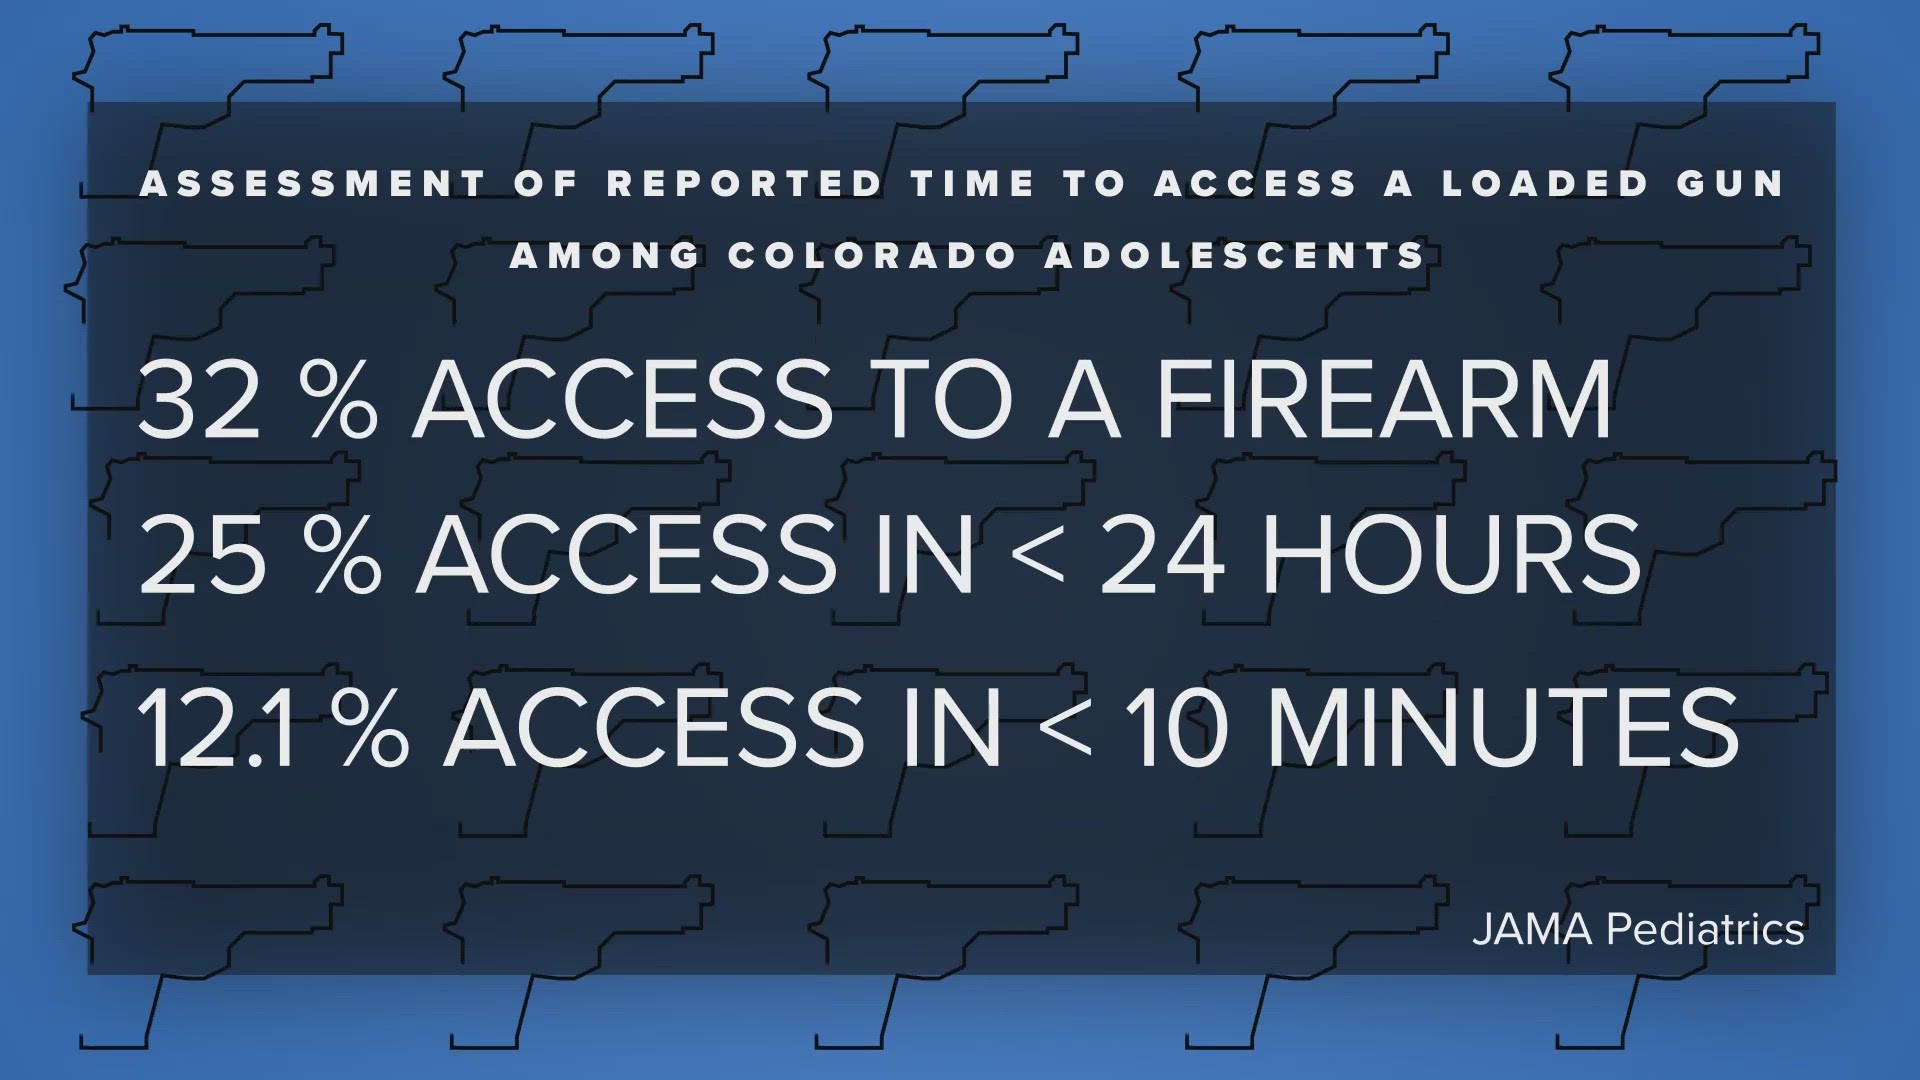 1 in 4 Colorado teens say they could get access to a gun in less than 24 hours. That's according to a research brief released Monday by researchers.